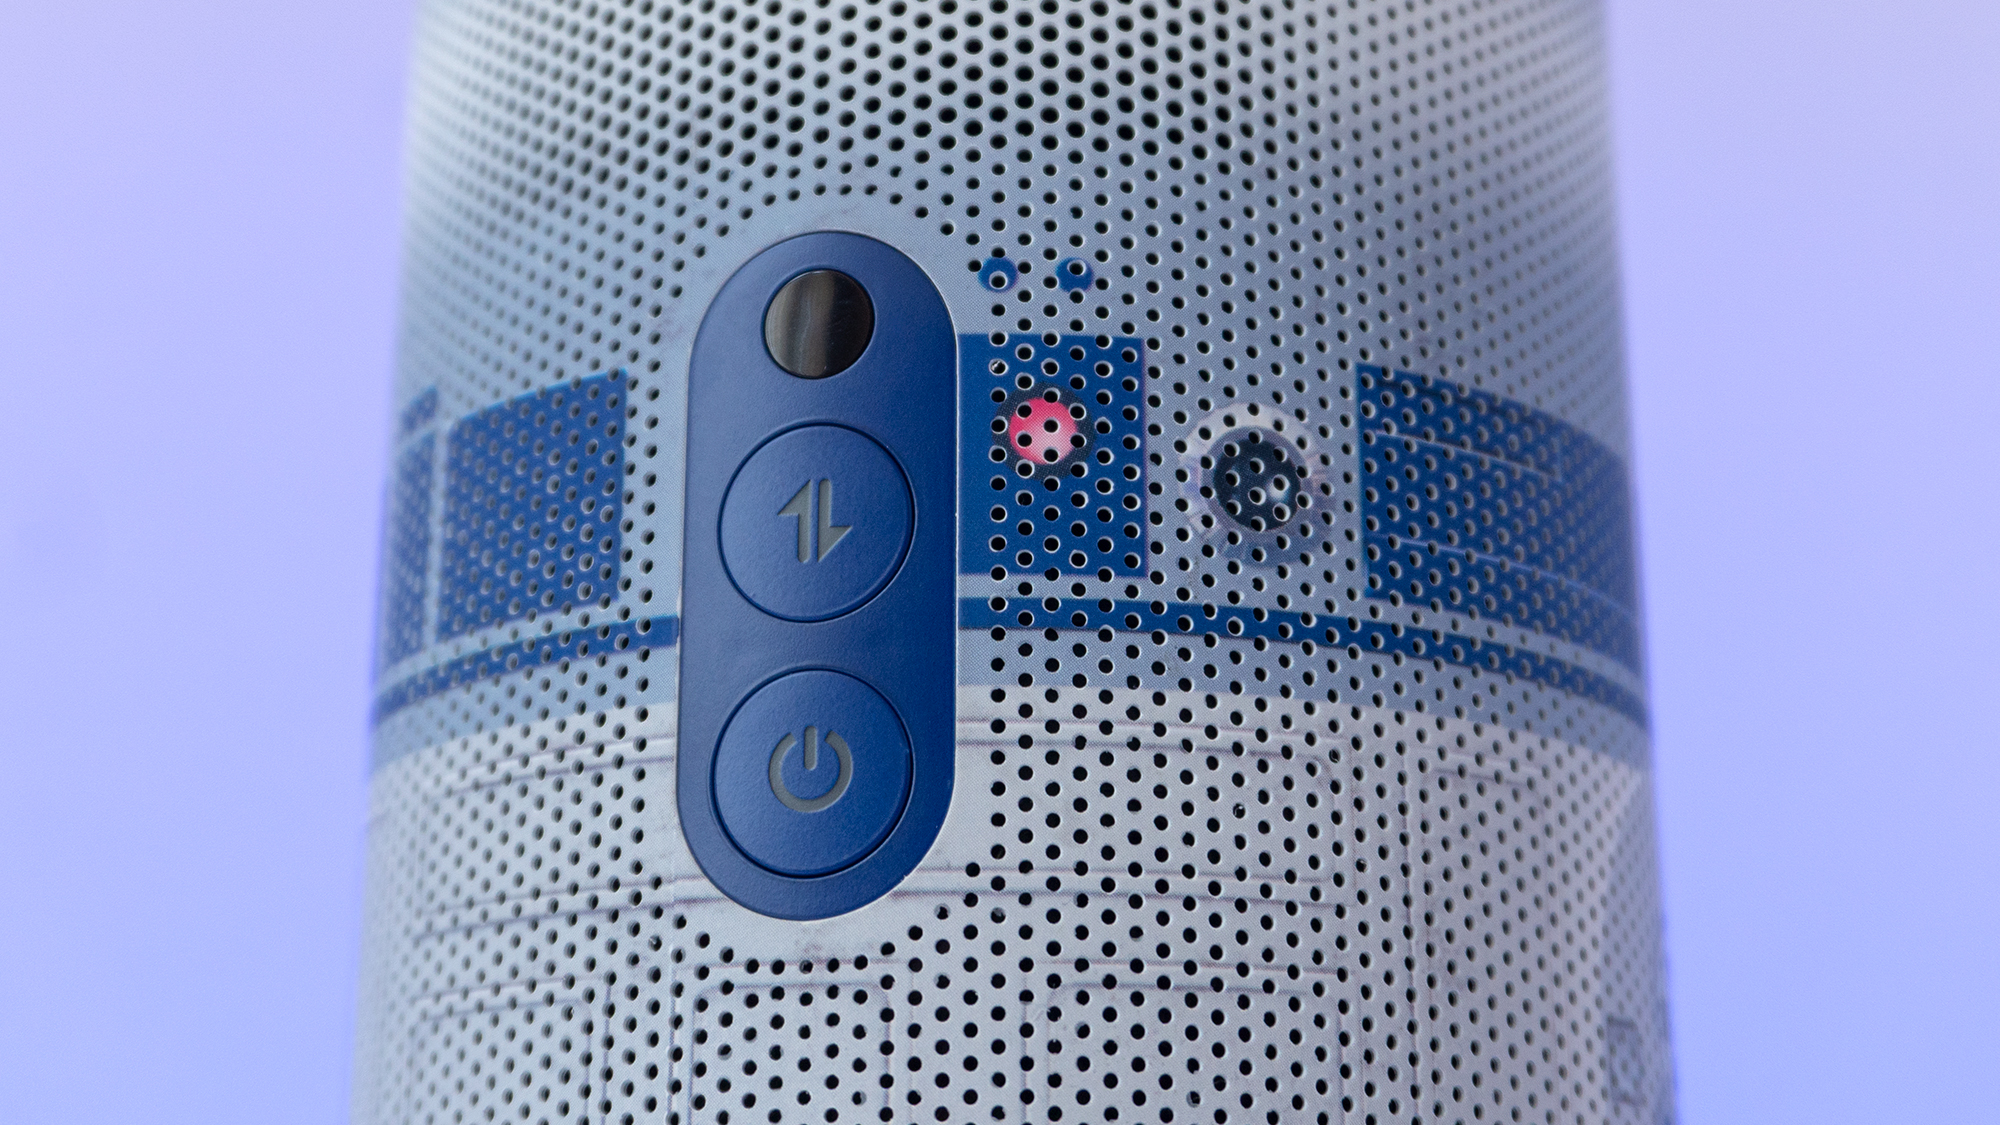 The included remote has a dedicated power button, but you can't actually completely turn off the projector using it. It can only be completely powered down using a physical button on the back, so you'll want to make sure you never permanently mount it somewhere out of reach. (Photo: Andrew Liszewski/Gizmodo)